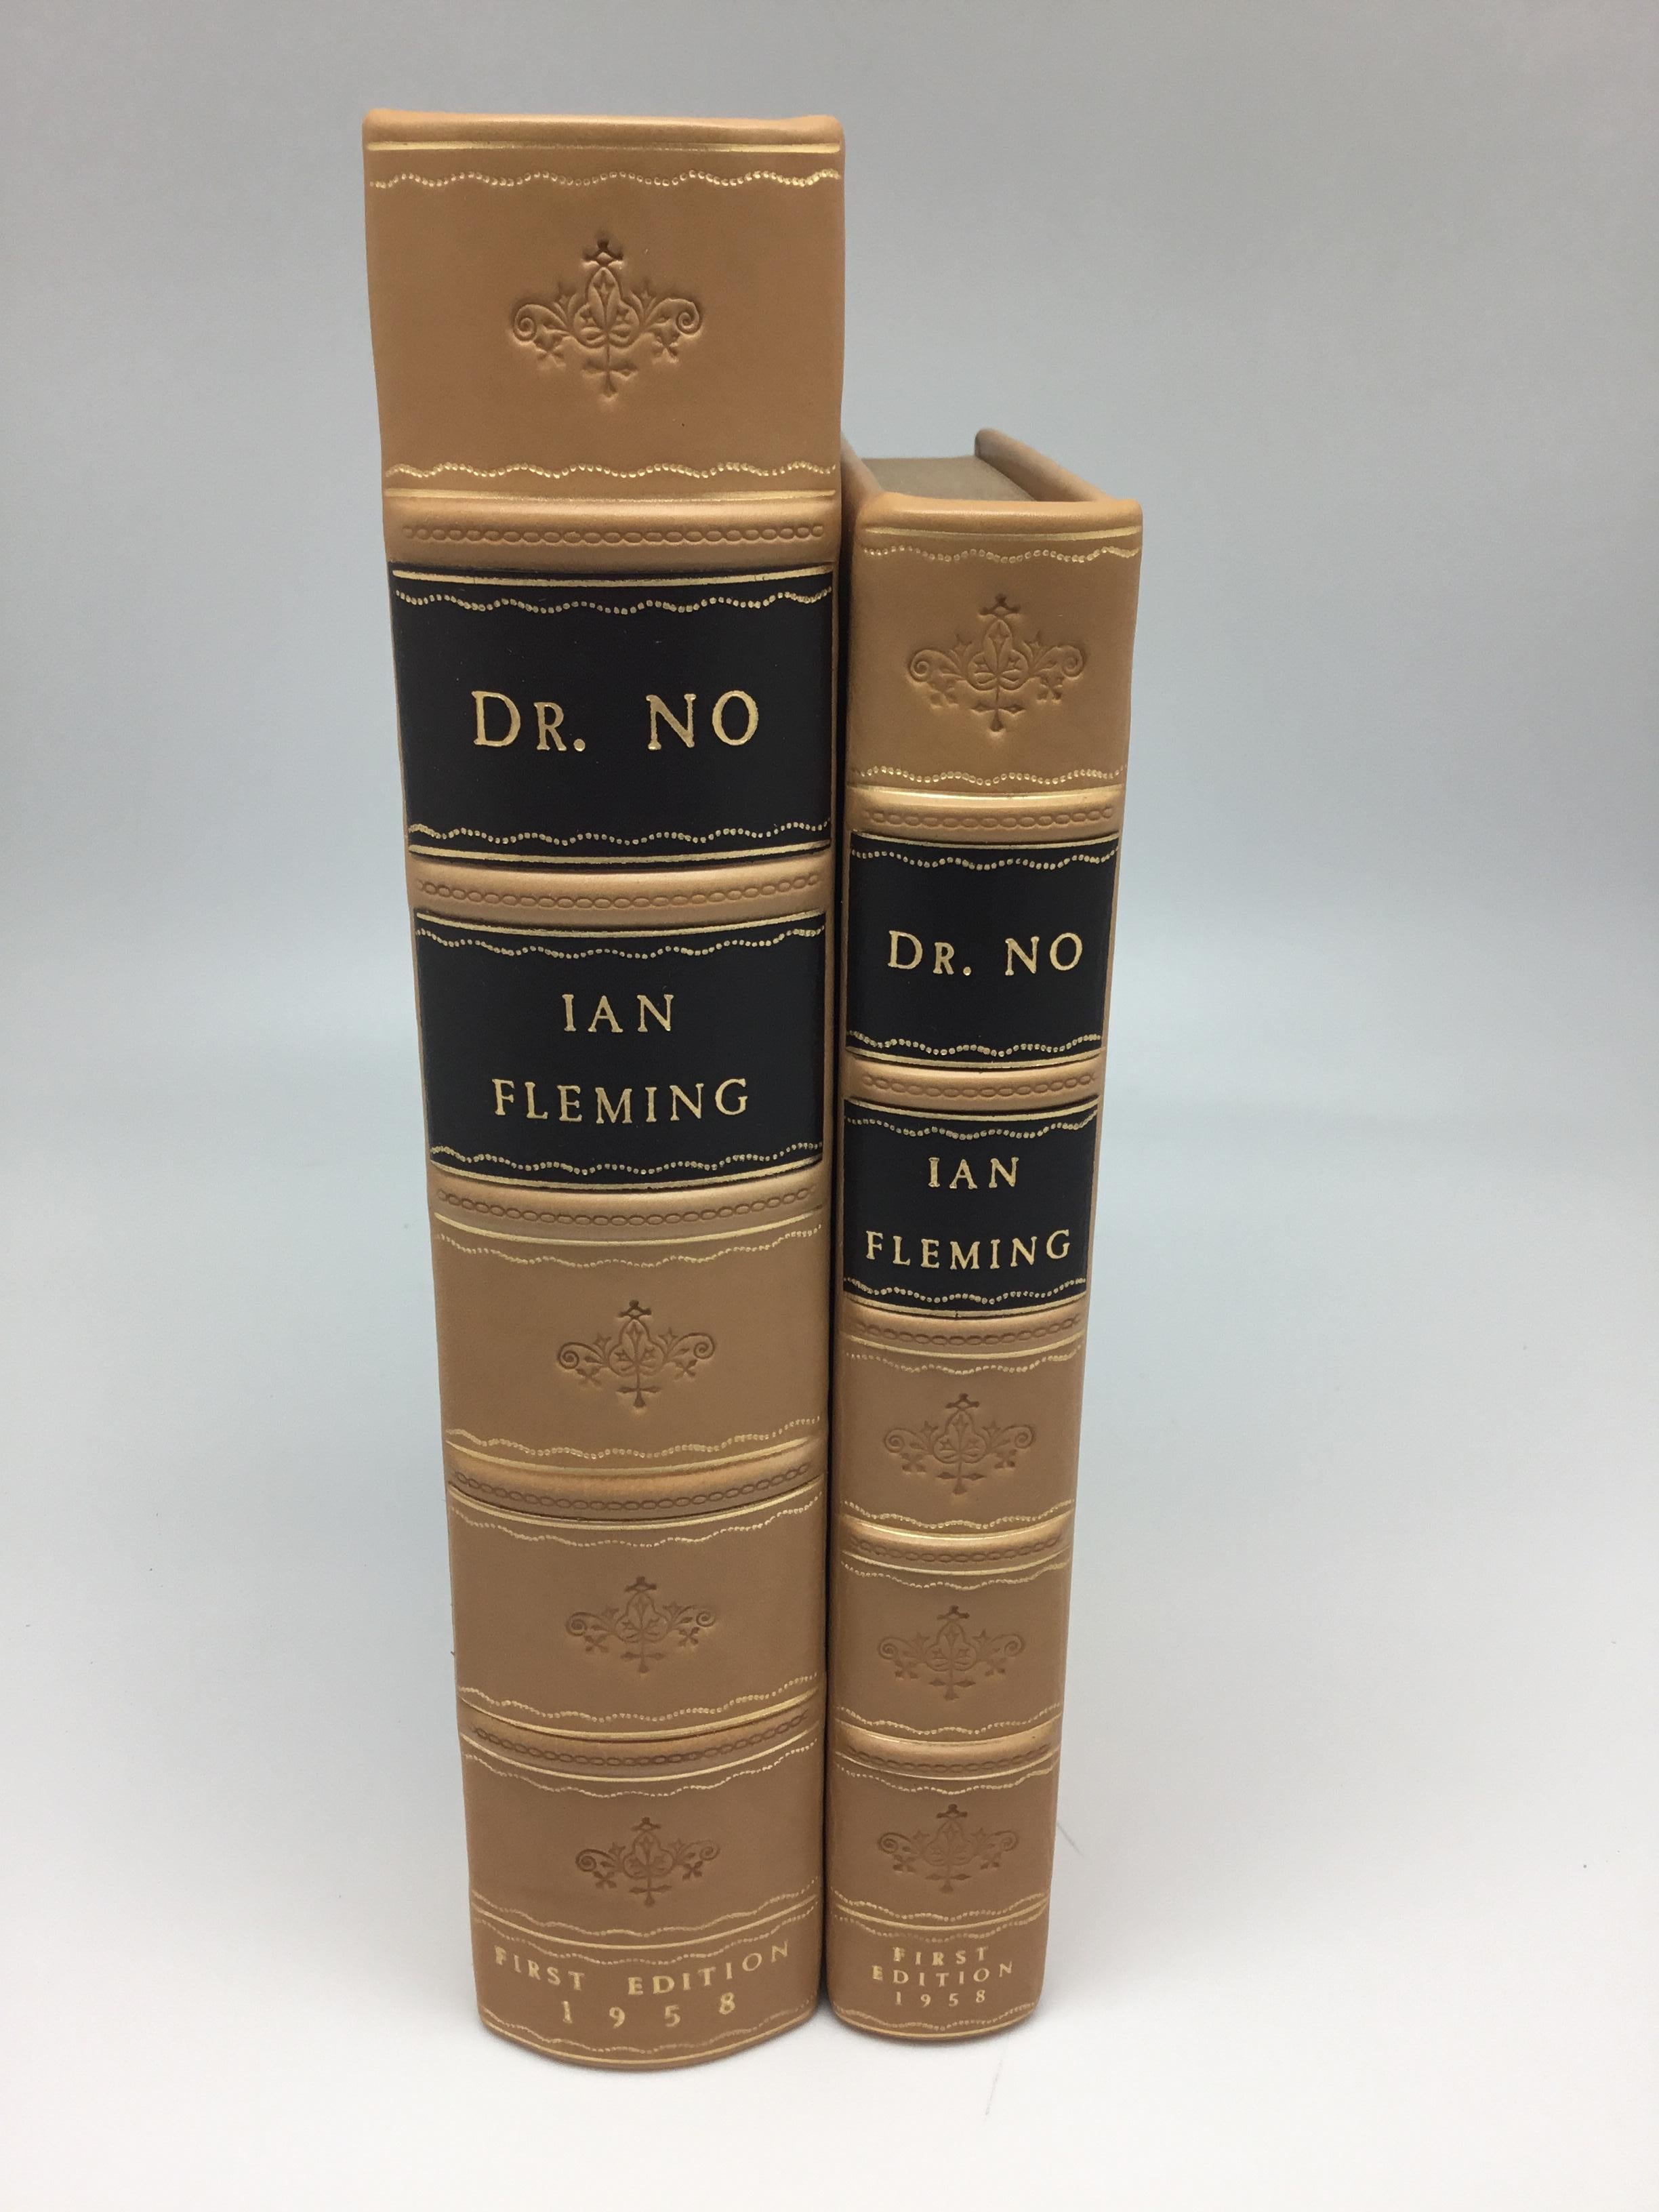 English Dr. NO by Ian Fleming, First Edition, 1958